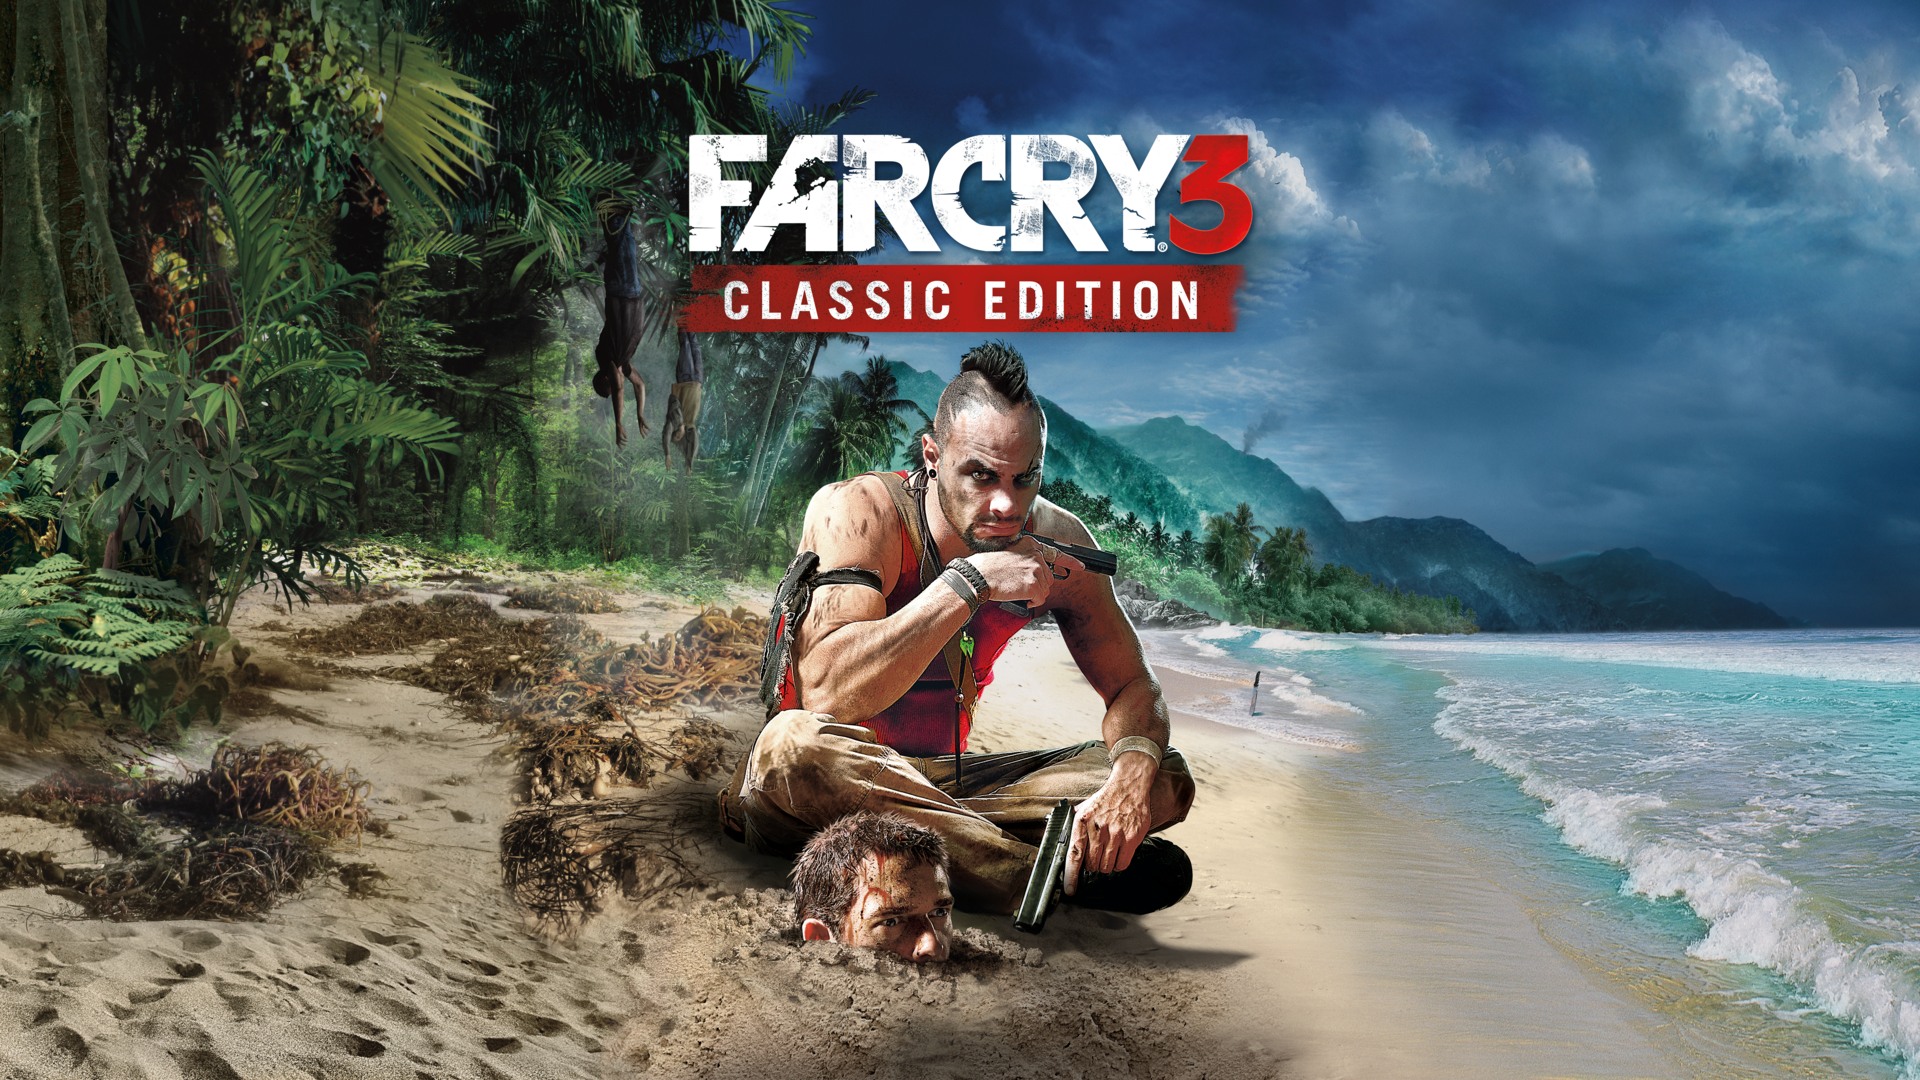 Classic Editions Poster Wallpaper From Far Cry 3 Classic Edition